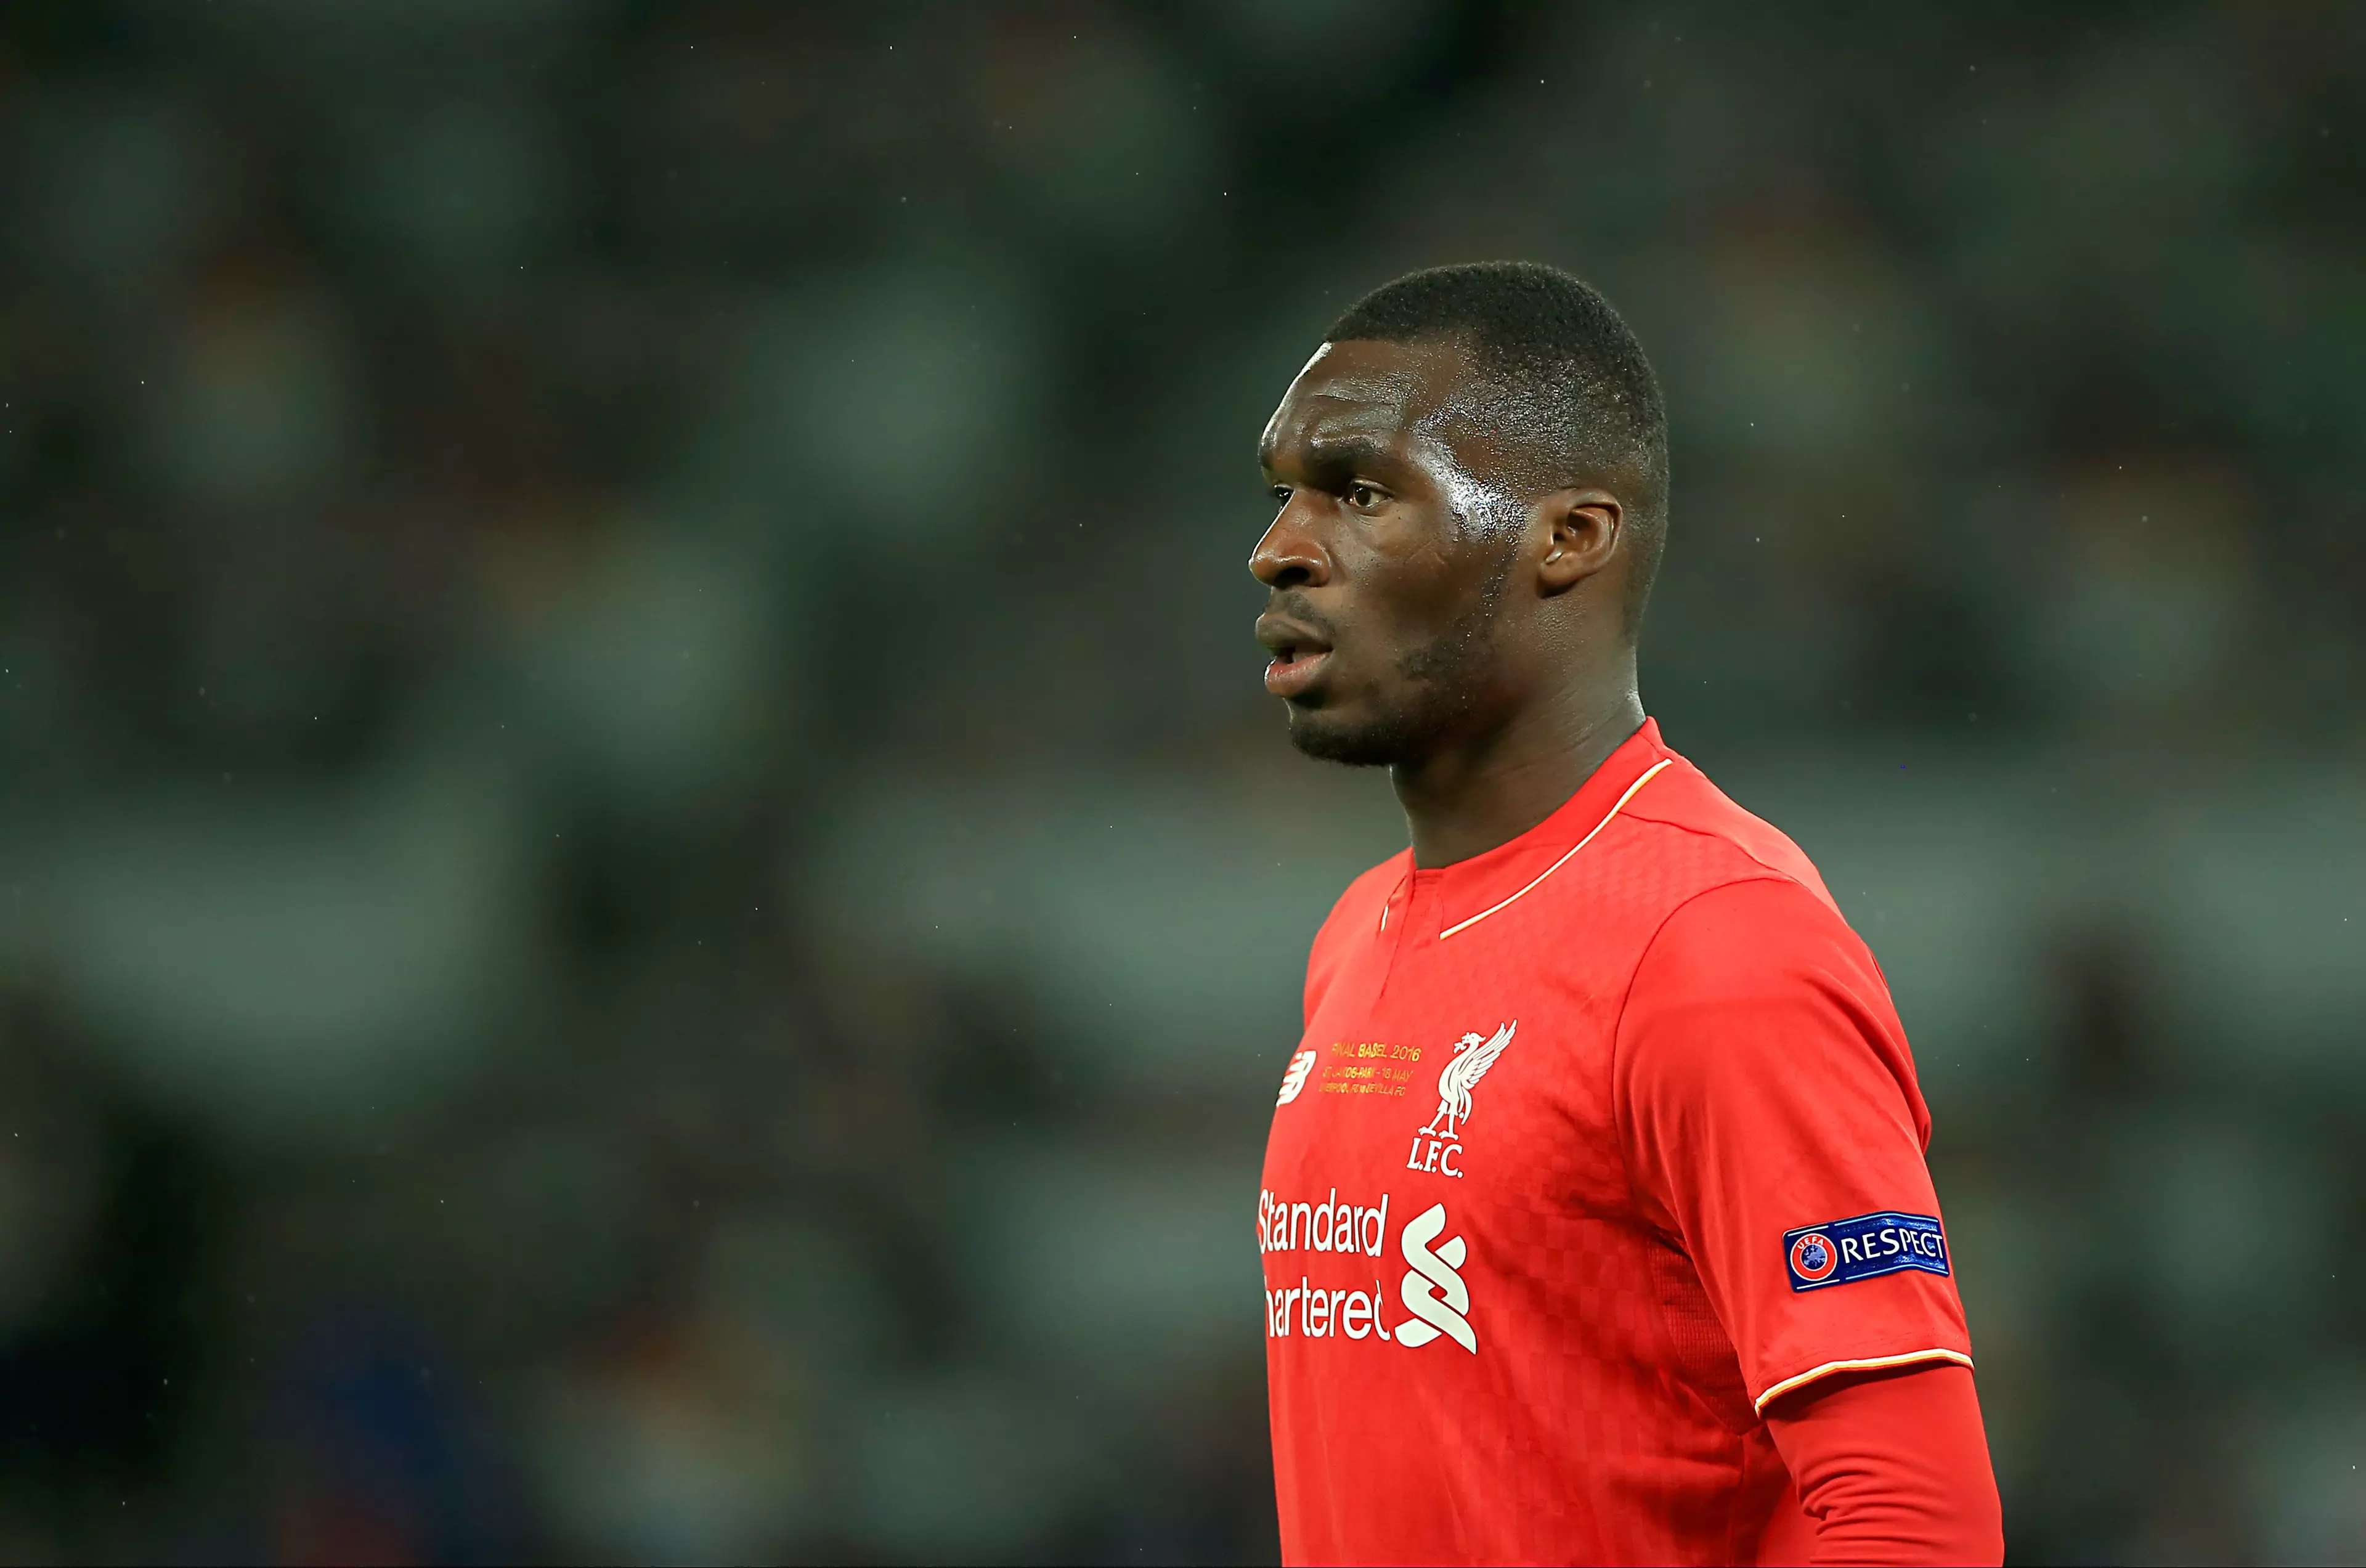 Christian Benteke Close To Joining Premier League Club For £25 Million